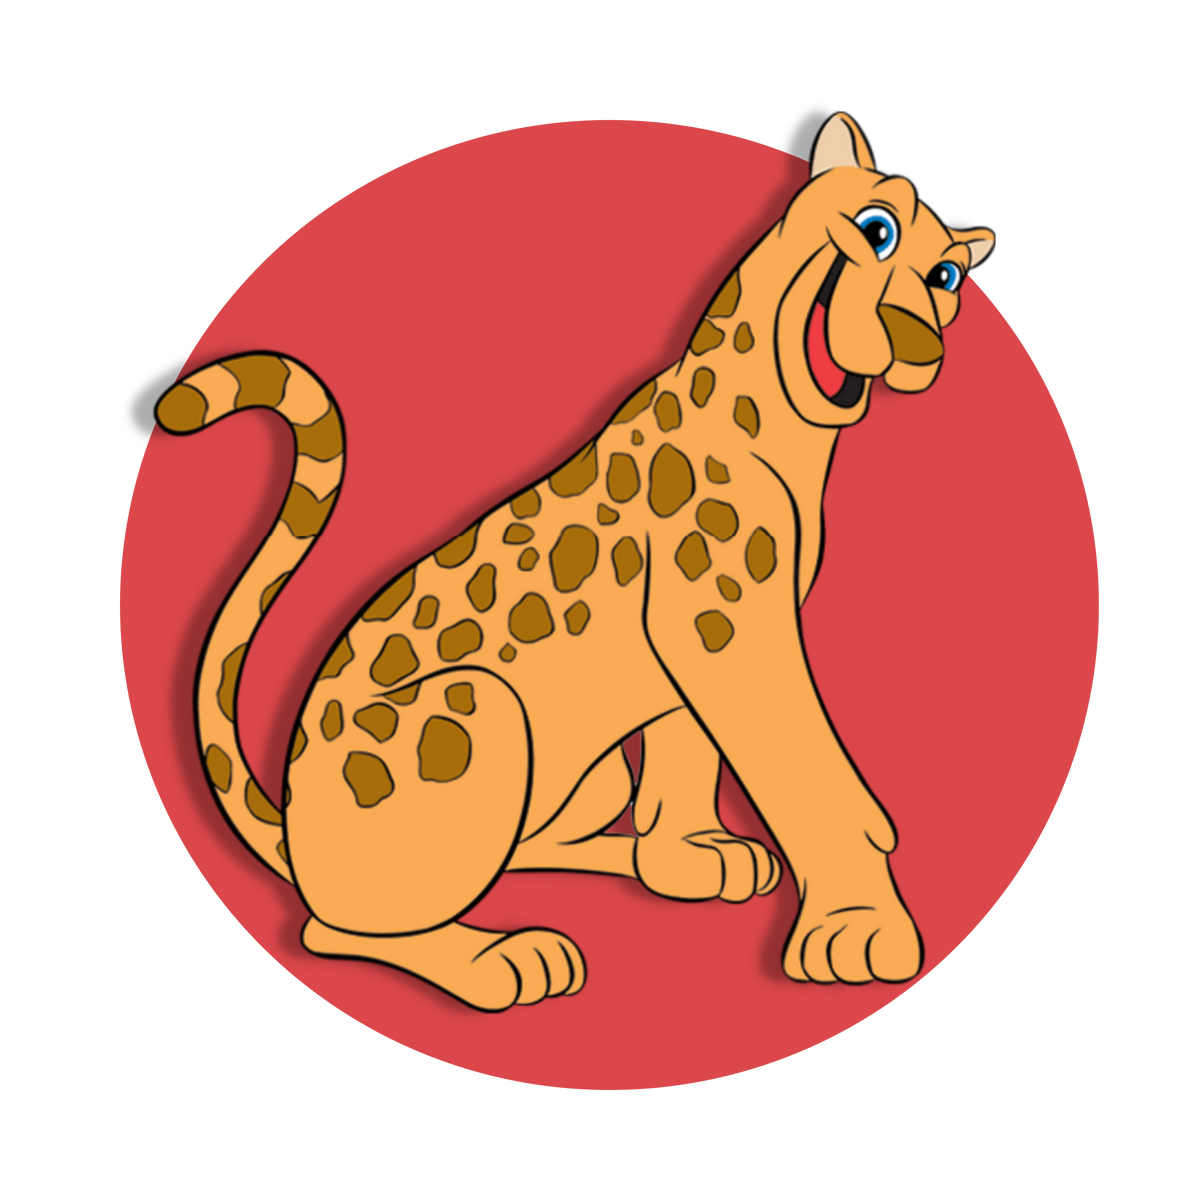 a cartoon illustration of a spotted leopard with a friendly expression. The leopard is sitting and shown in a side profile with its tail curled upwards, and its body is adorned with detailed spots. It’s set against a red circular background that highlights the leopard’s figure. 